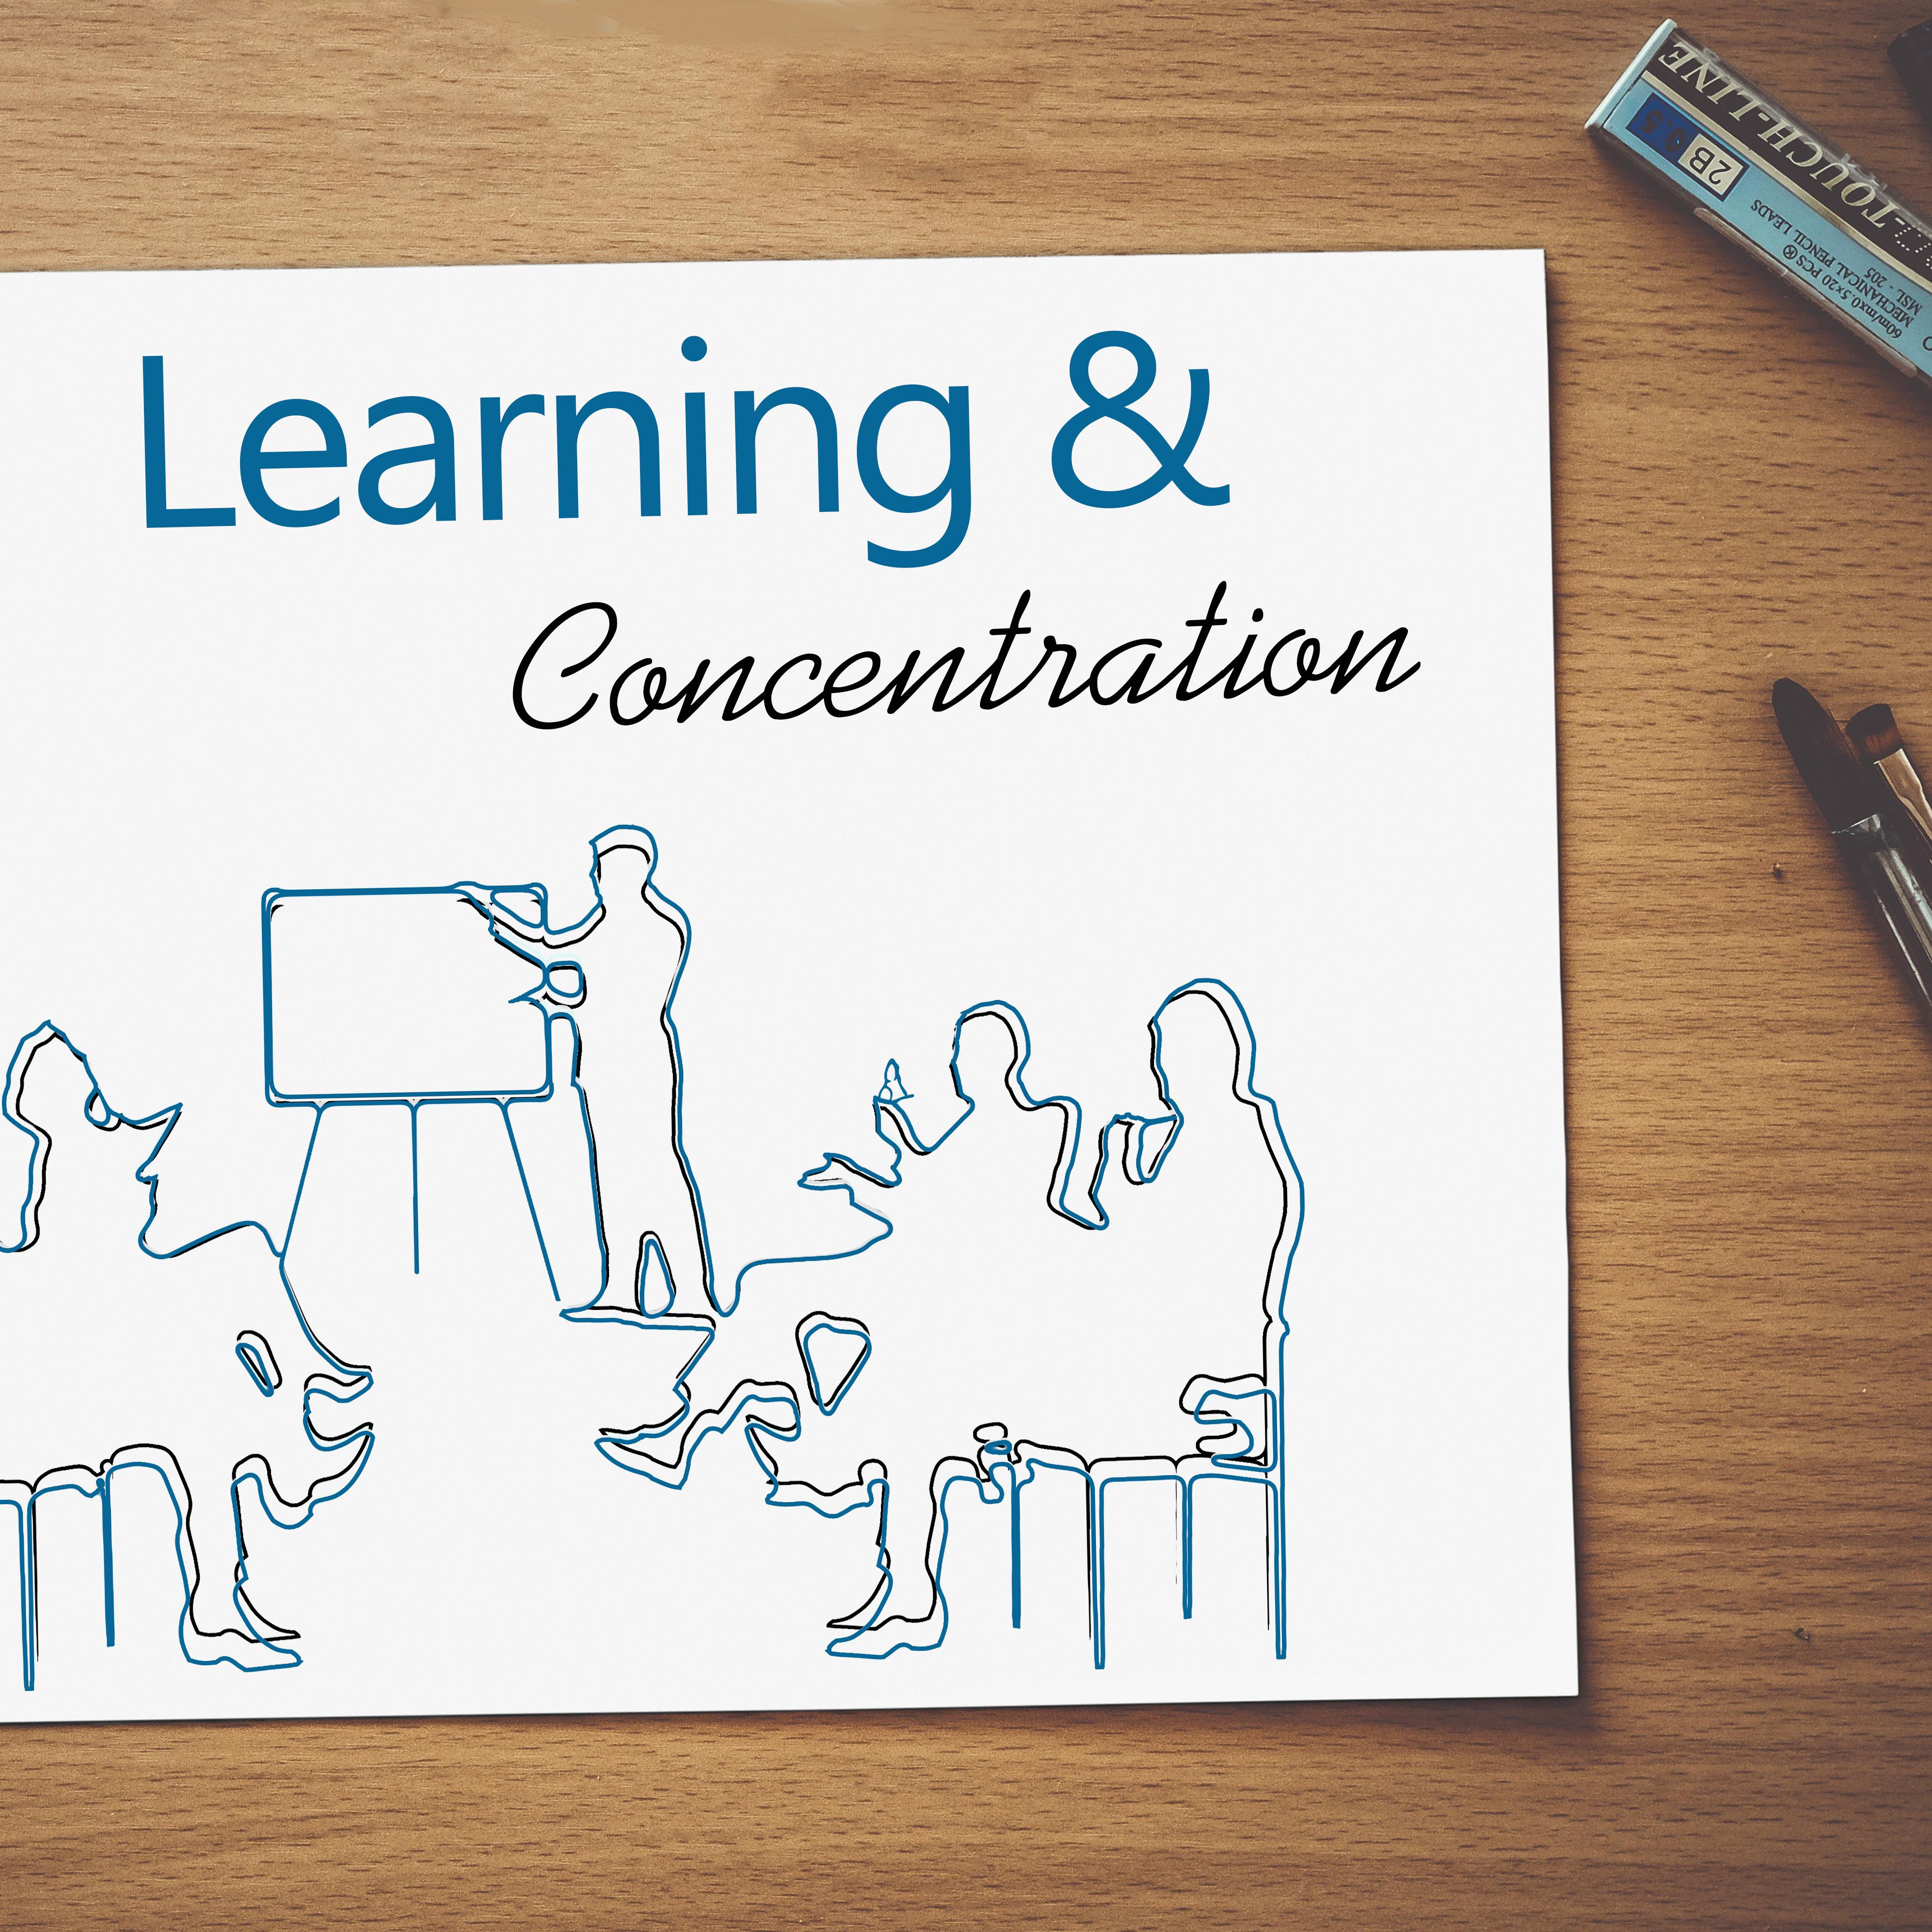 Learning  Concentration  Best Classical Music for Study, Easy Work, Better Memory, Mozart, Bach, Beethoven